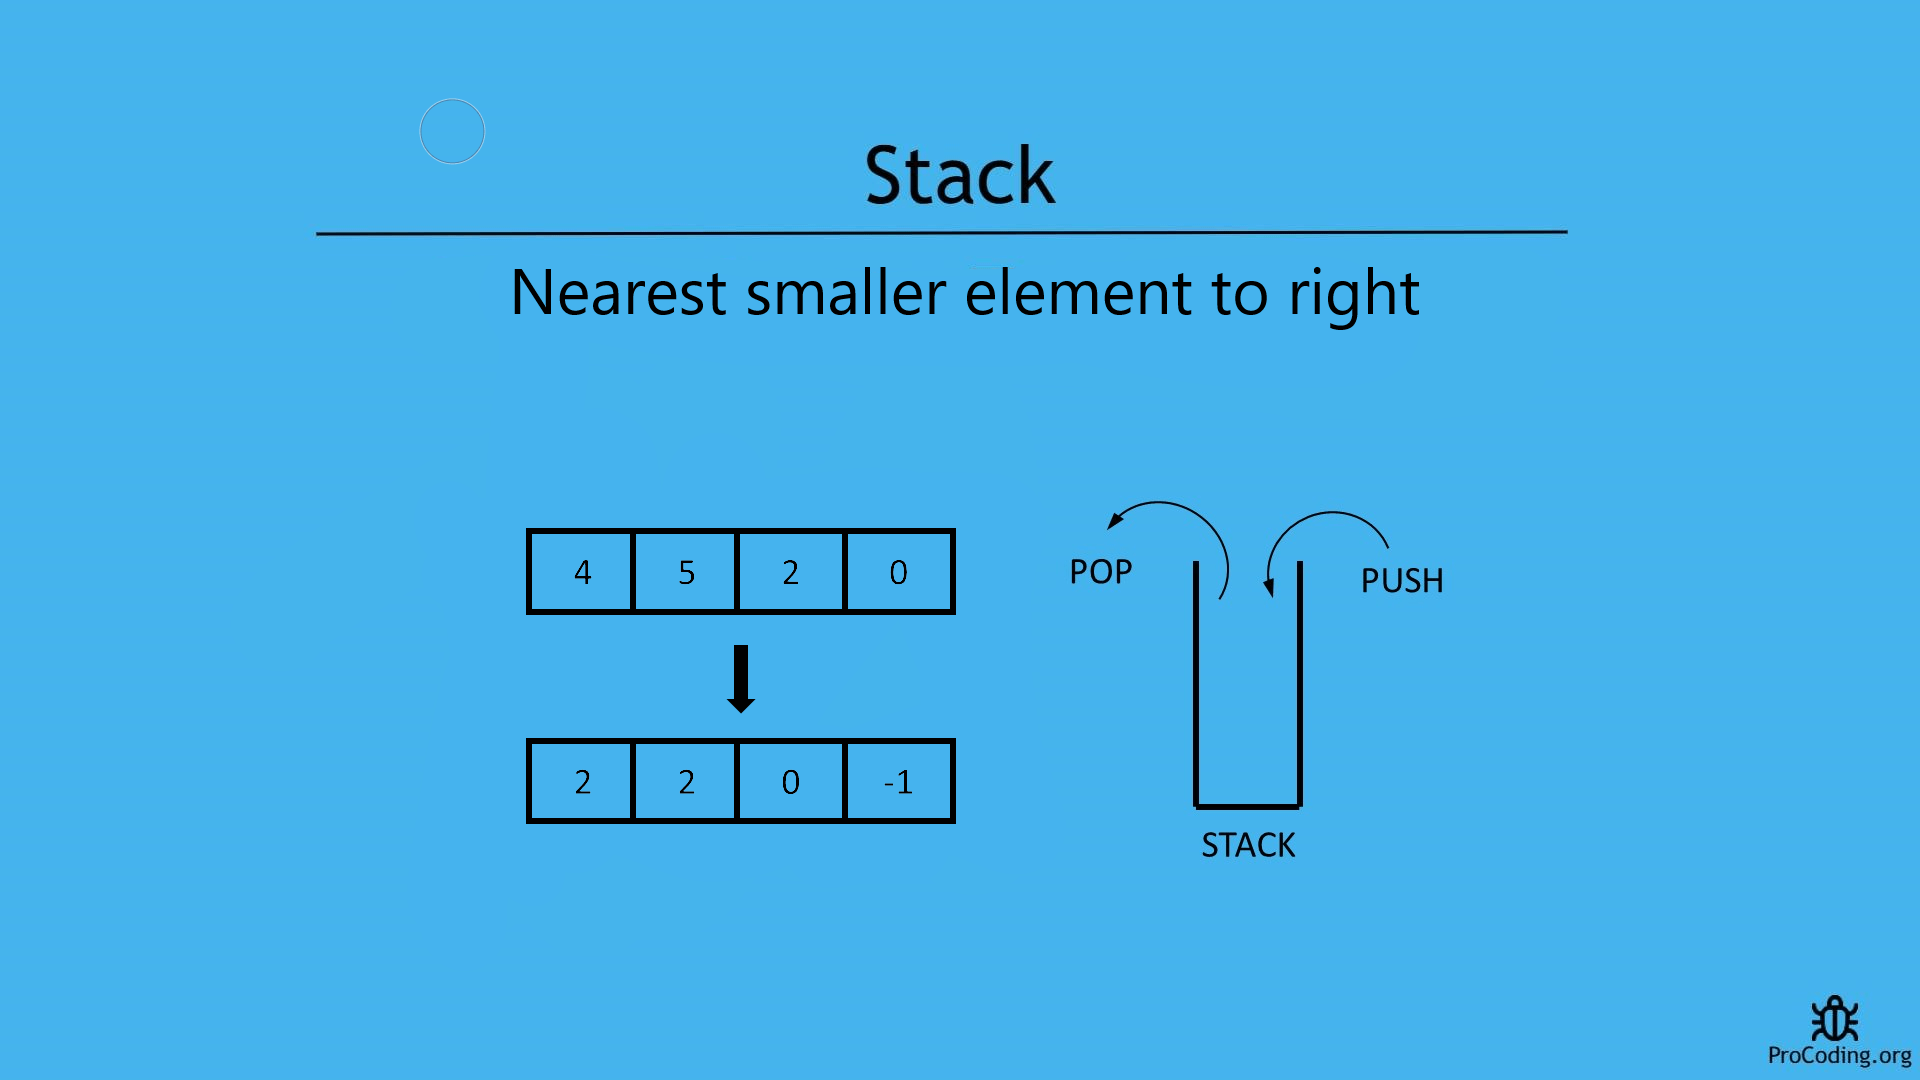 Nearest greatest element to left in stack